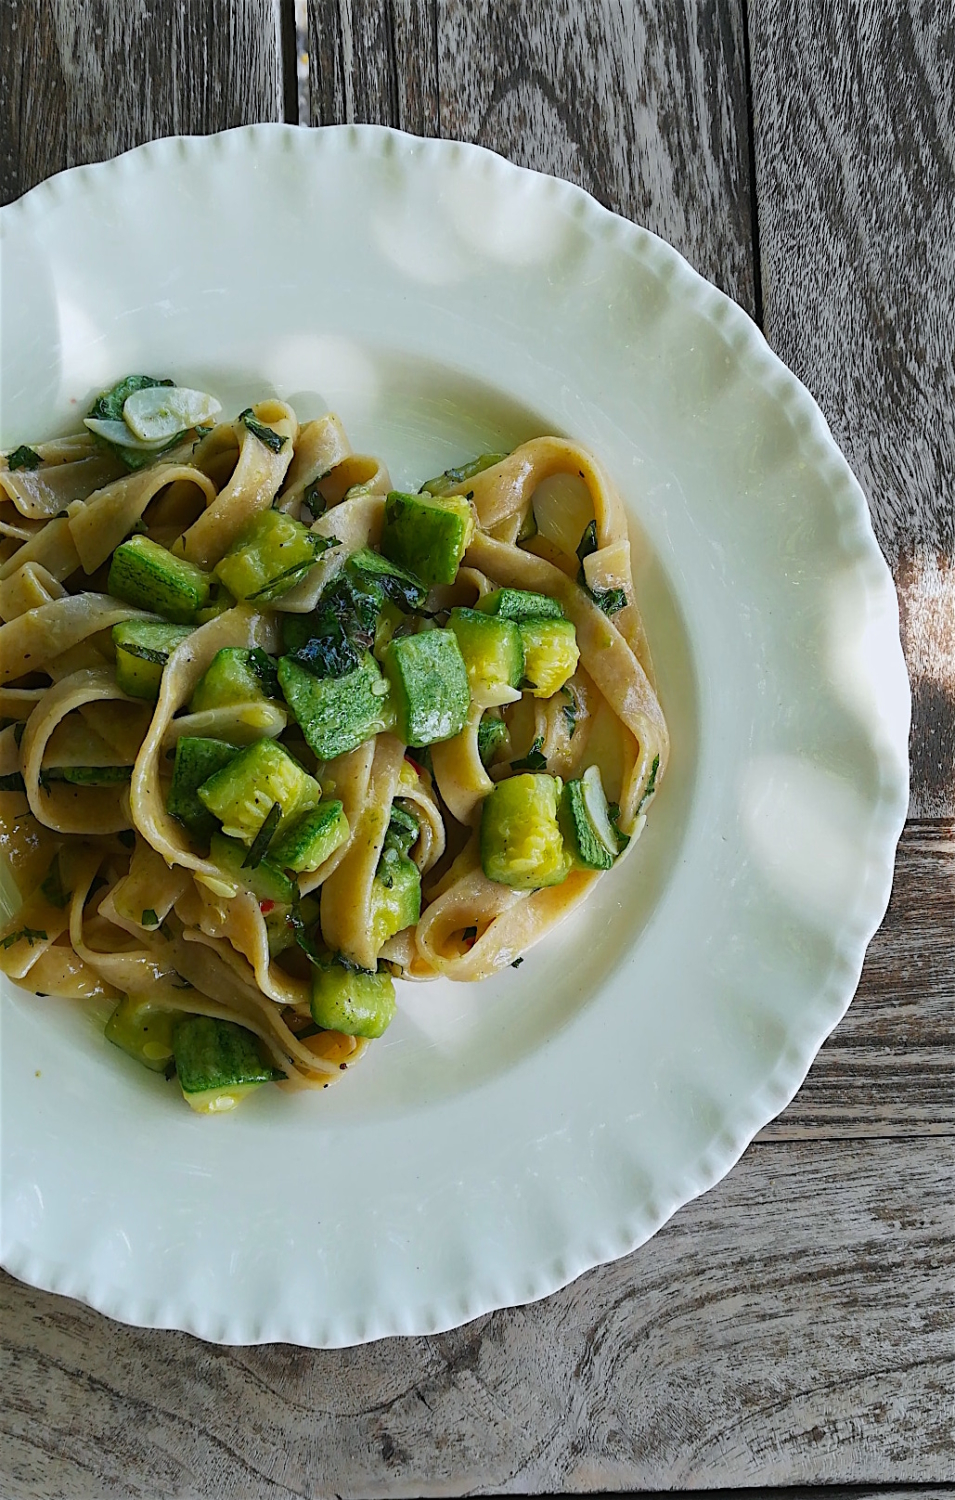 Our 15 minute summer pasta with zucchini and anchovies - Il Ghiottone Umbro